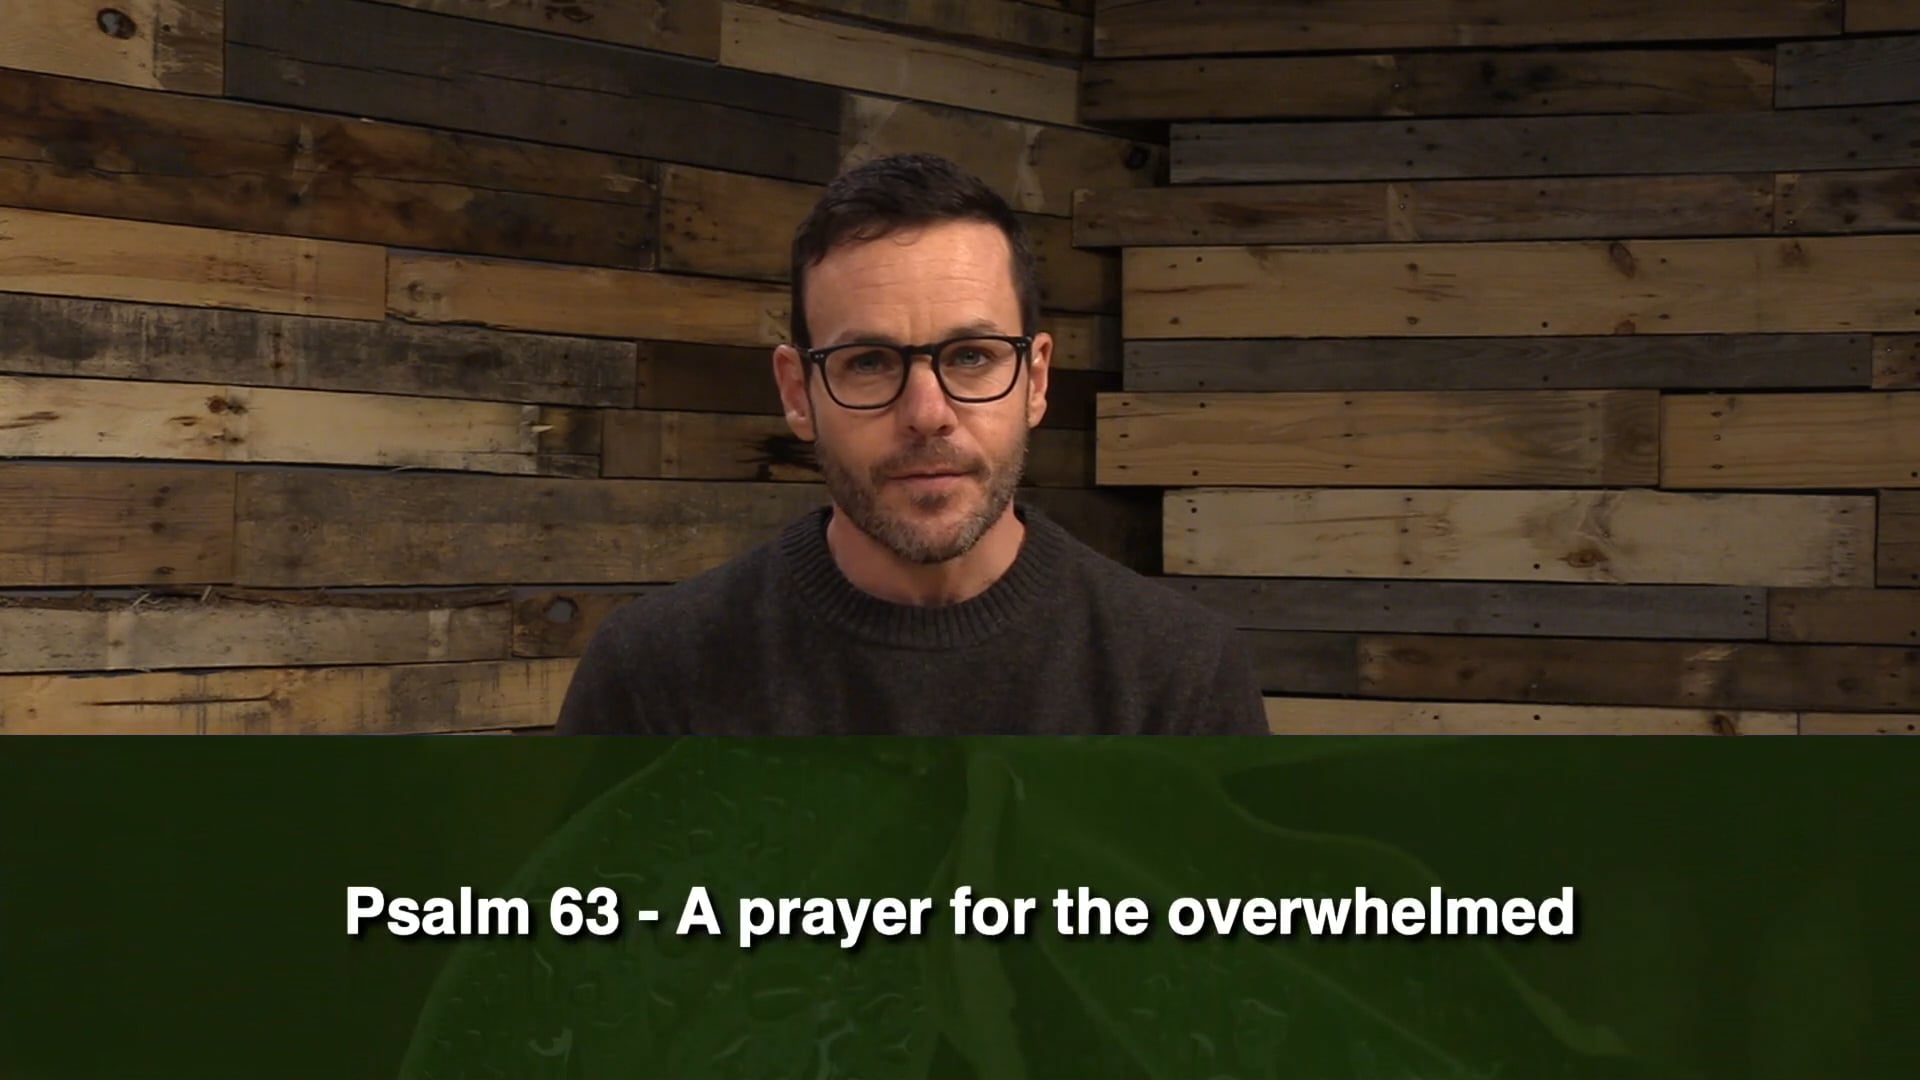 24.02.25 - The Psalms | A Prayer for the Overwhelmed